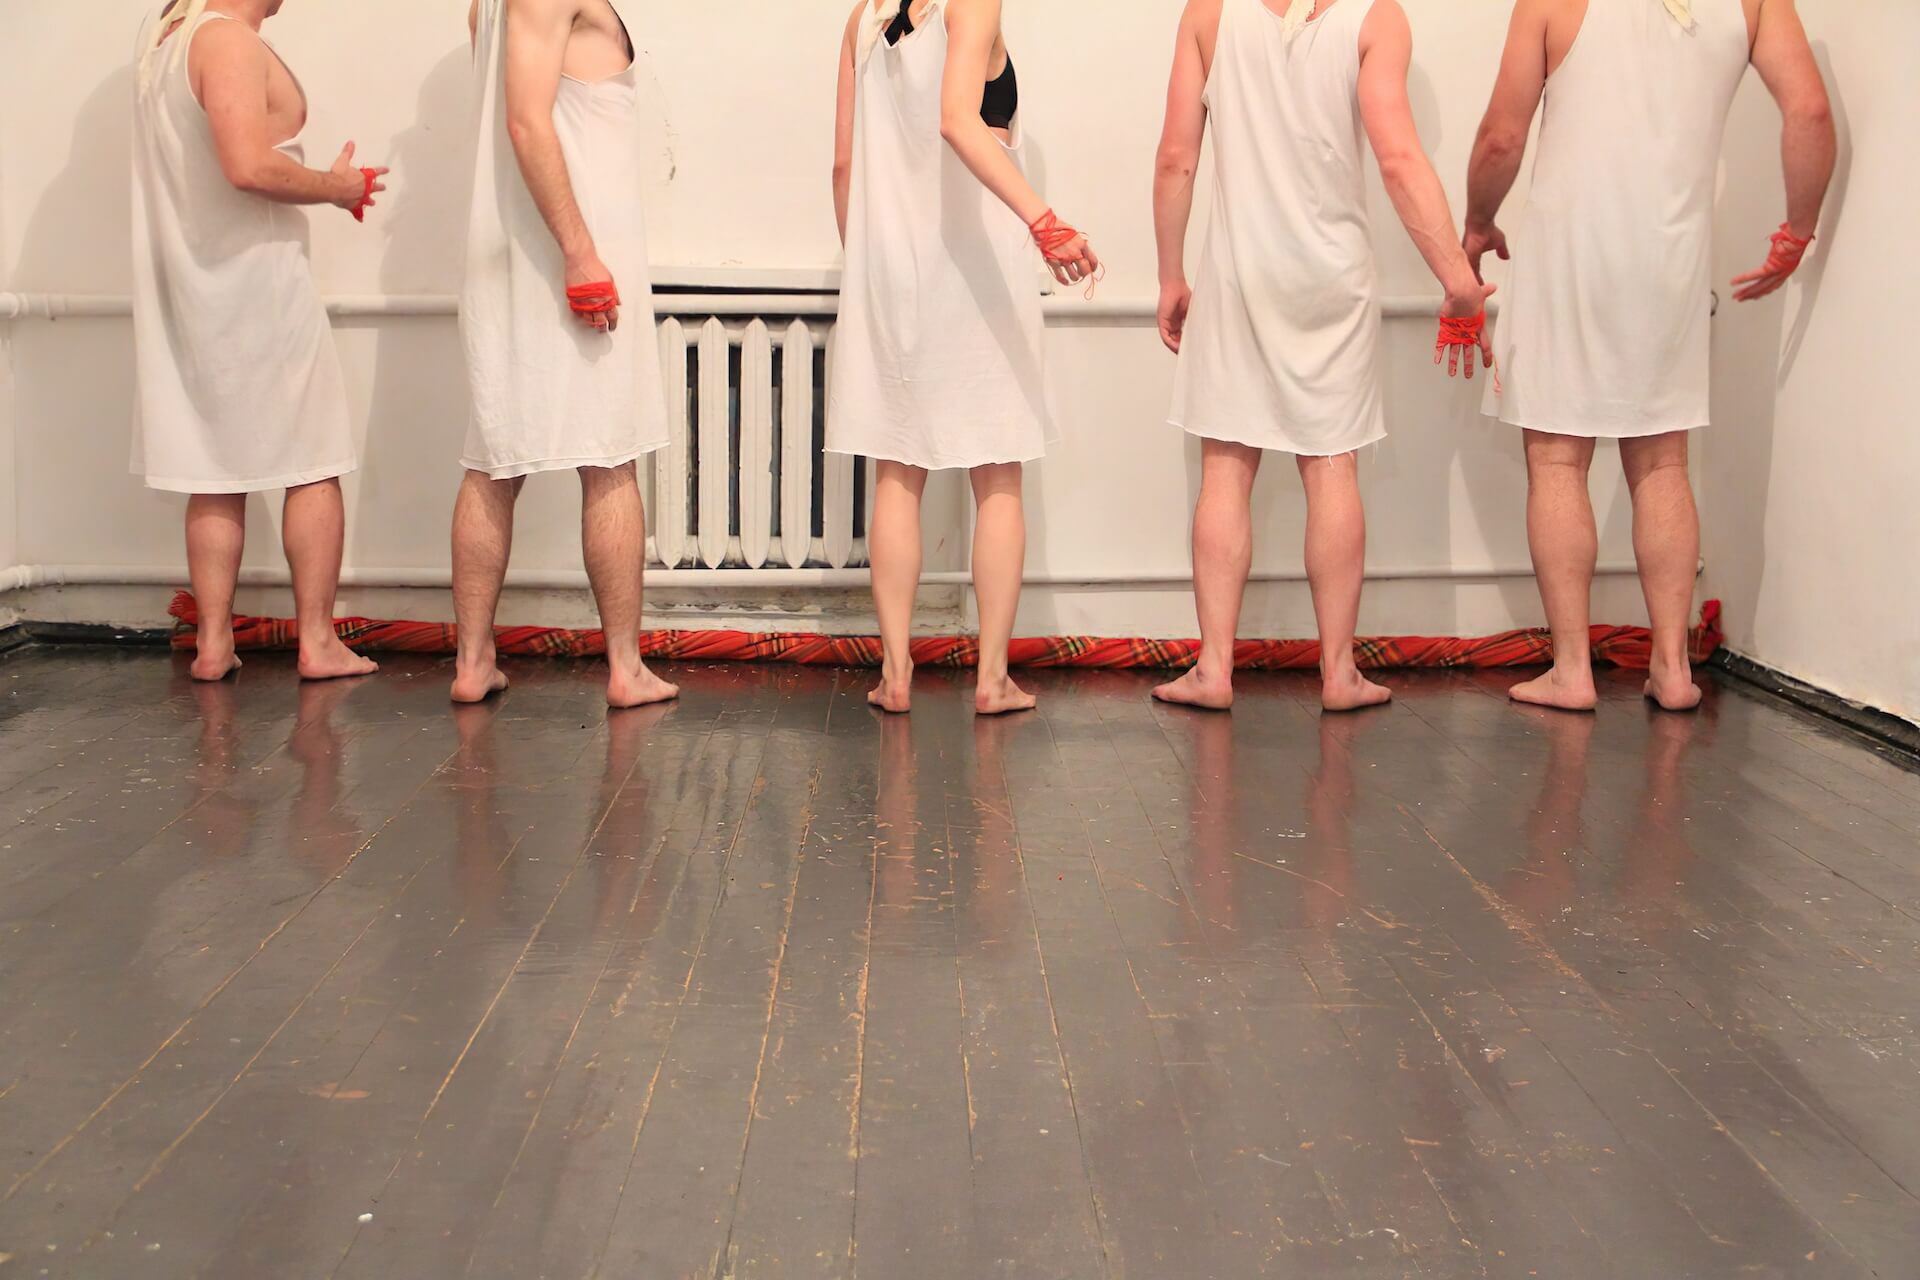 Four performers in white garments are standing by the wall and turning back